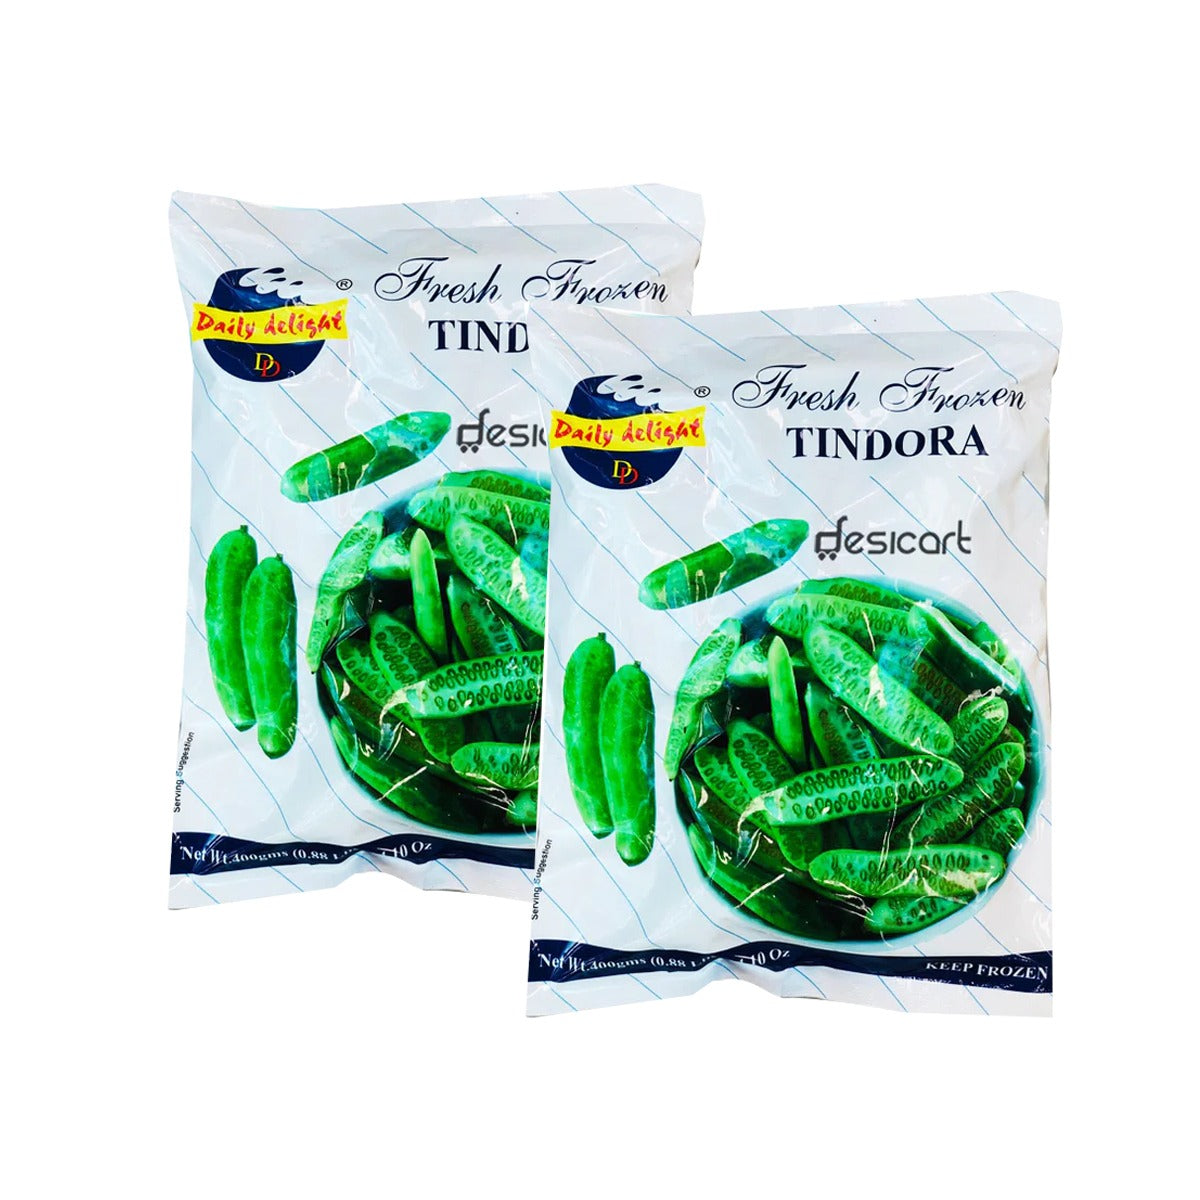 DAILY DELIGHT FROZEN TINDORA 400G (PACK OF 2)